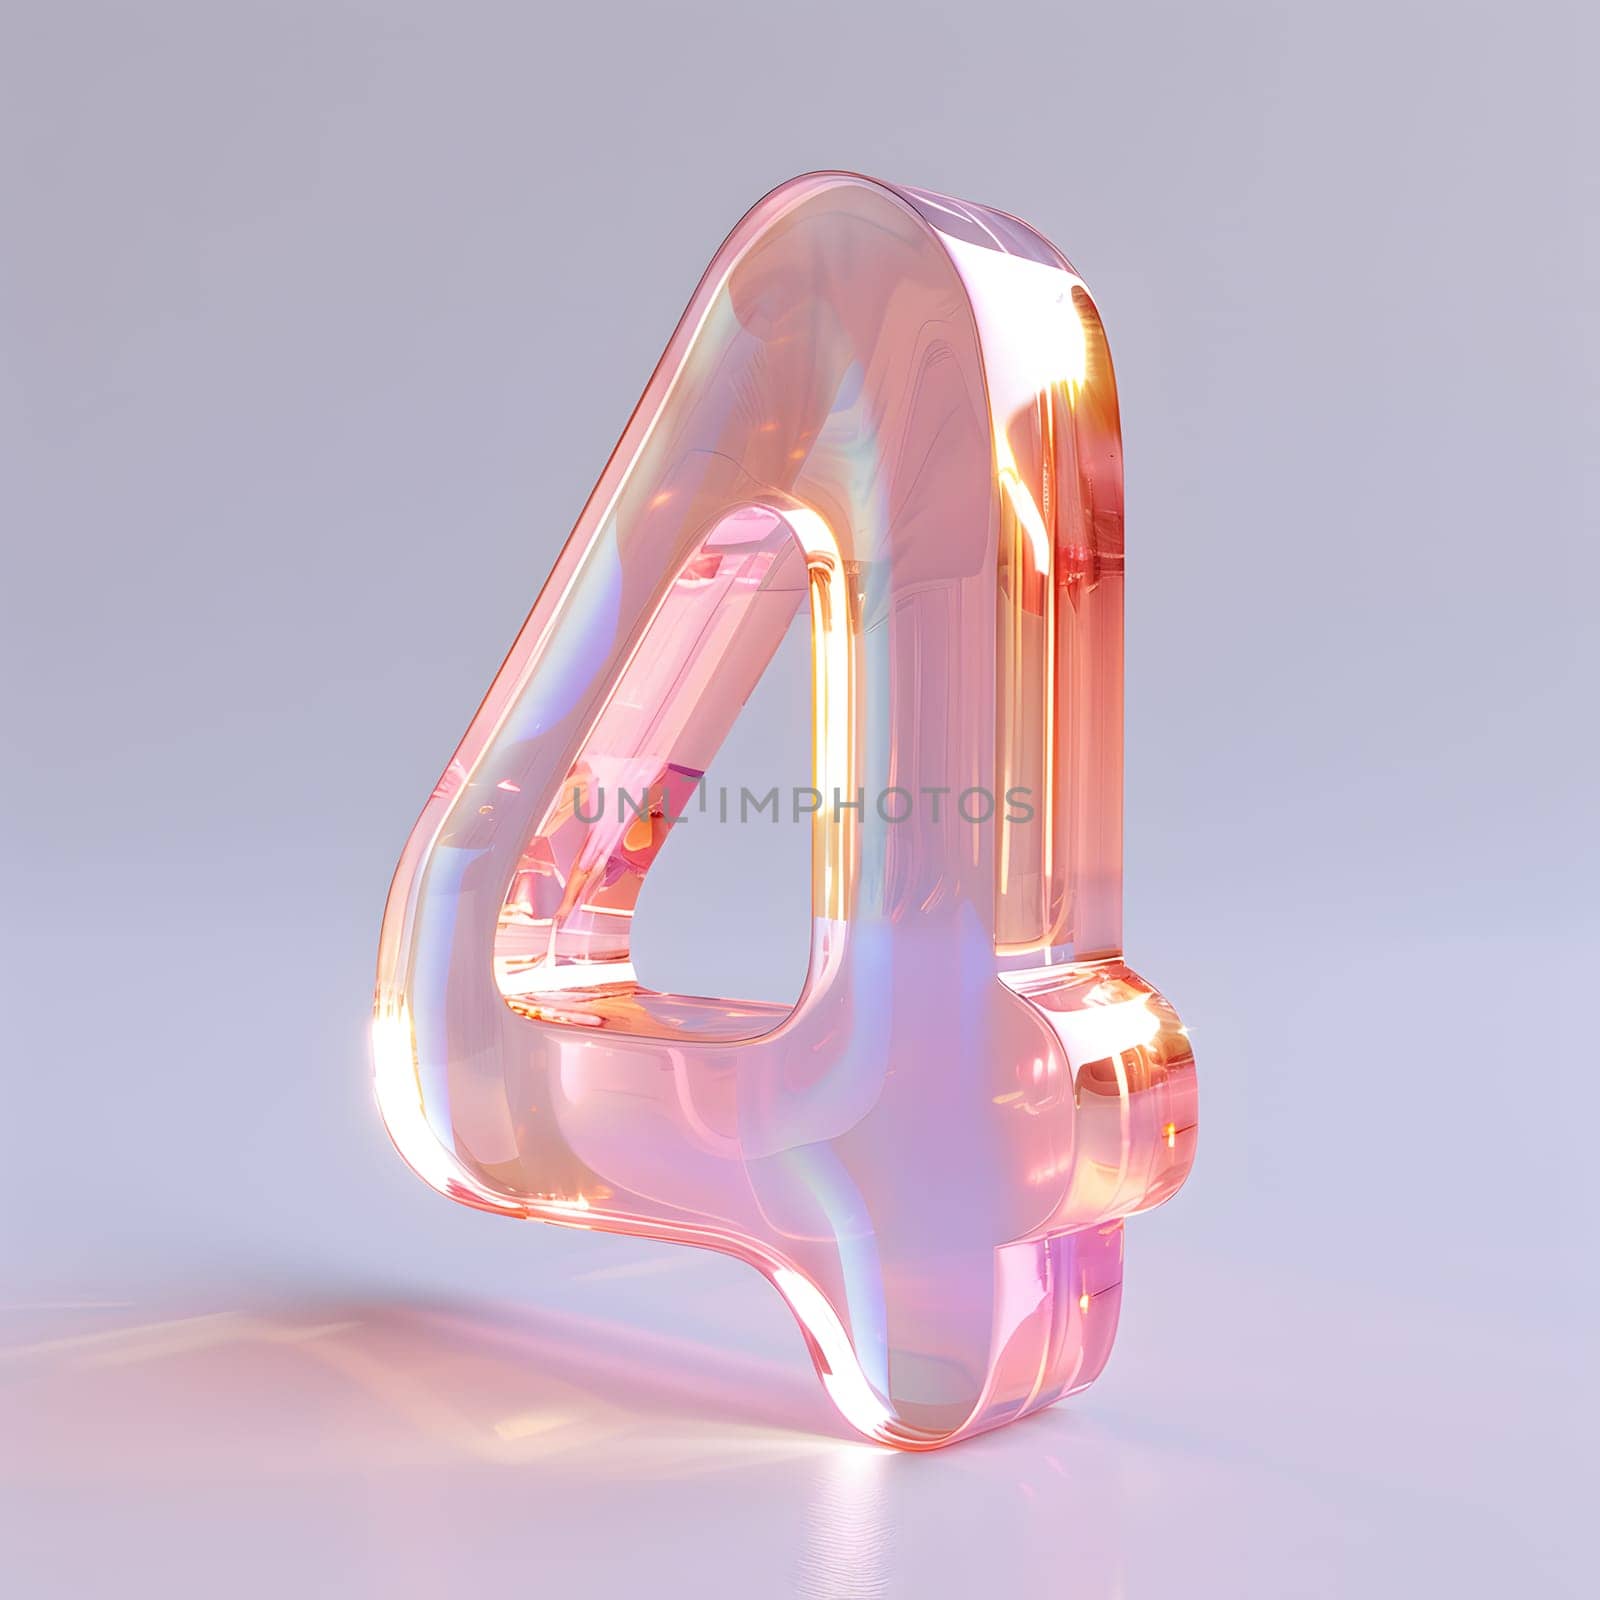 Automotive lighting inspired by art, featuring a floating number four made of transparent glass. The electric blue, magenta, and peach hues create a unique fashion accessory design